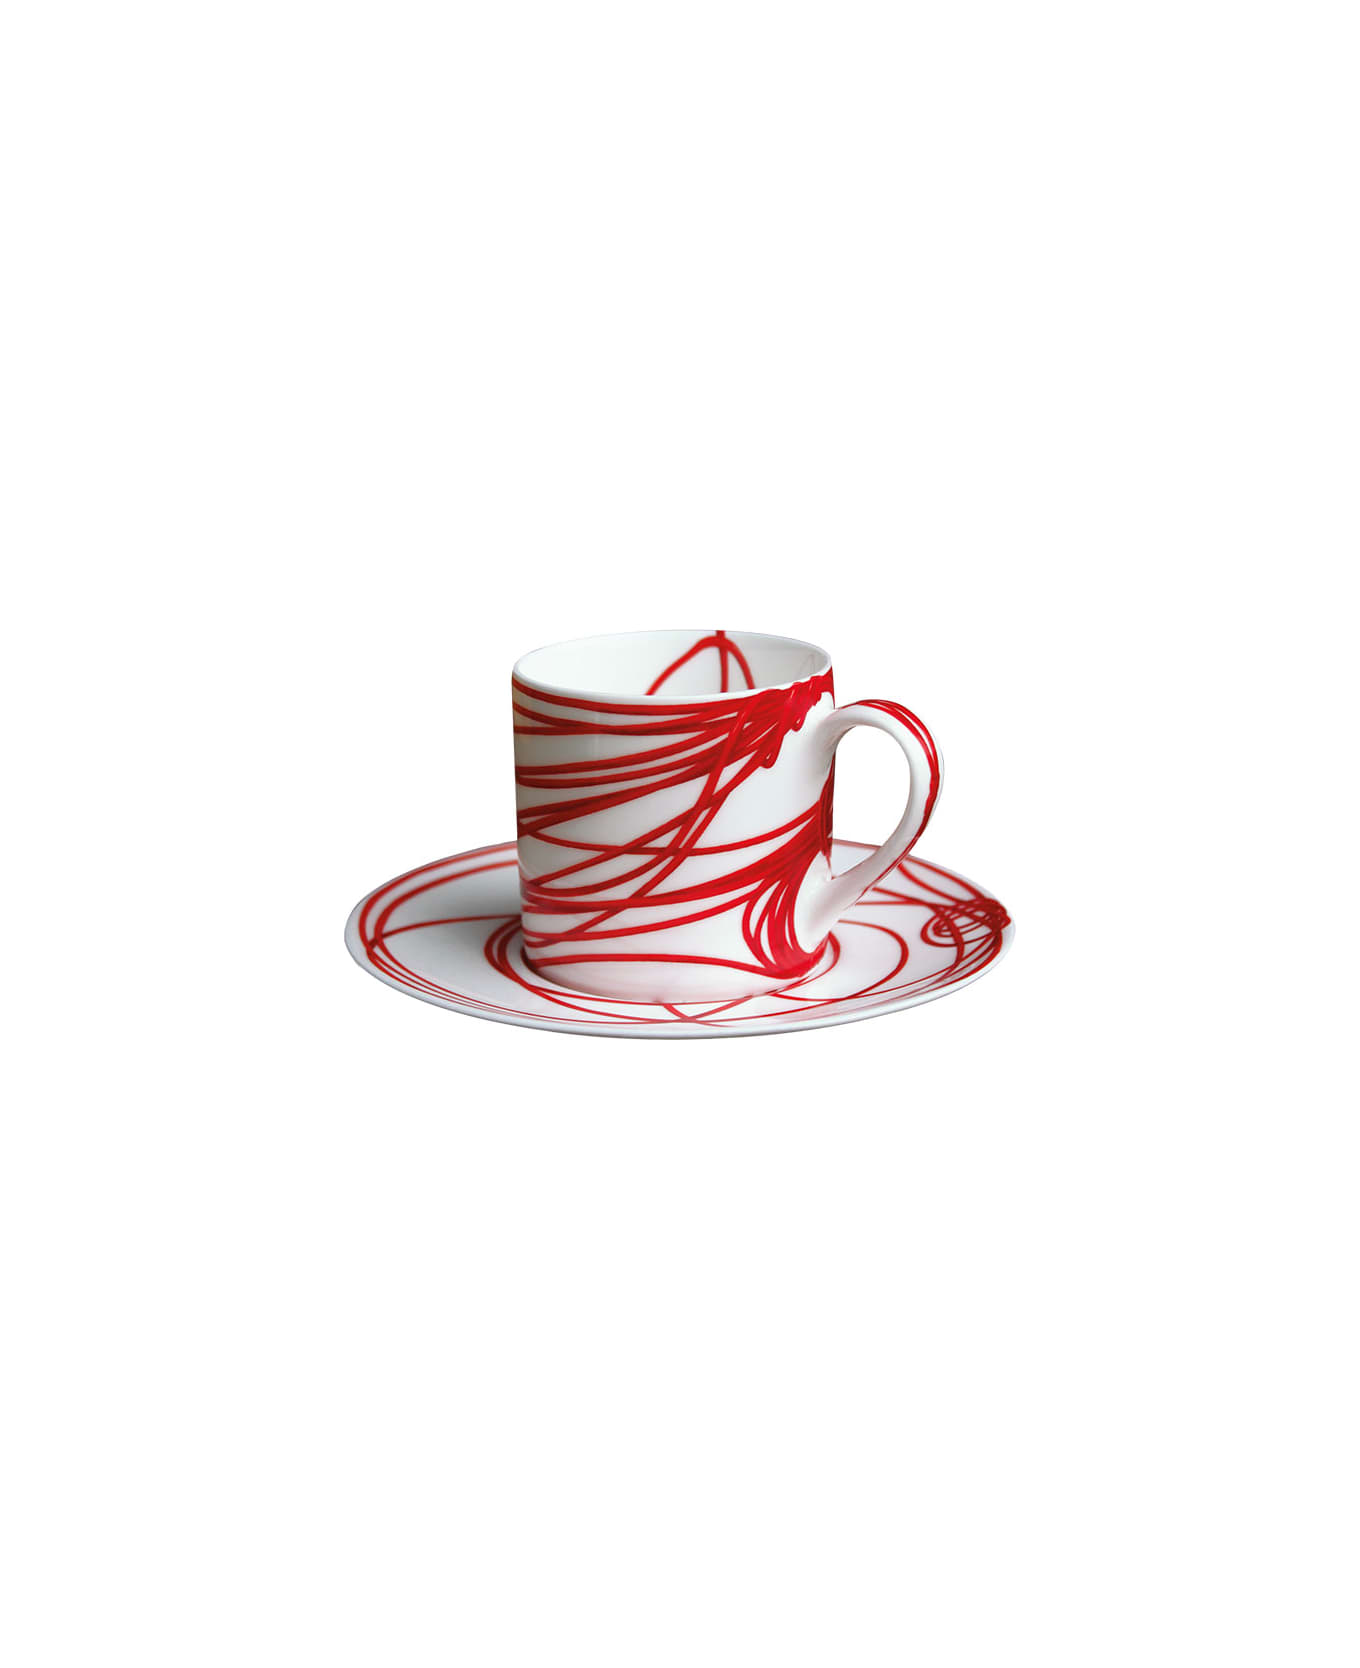 Taitù Set of 2 Espresso Cups & Saucers - Fil Rouge Nodi Collection - Red